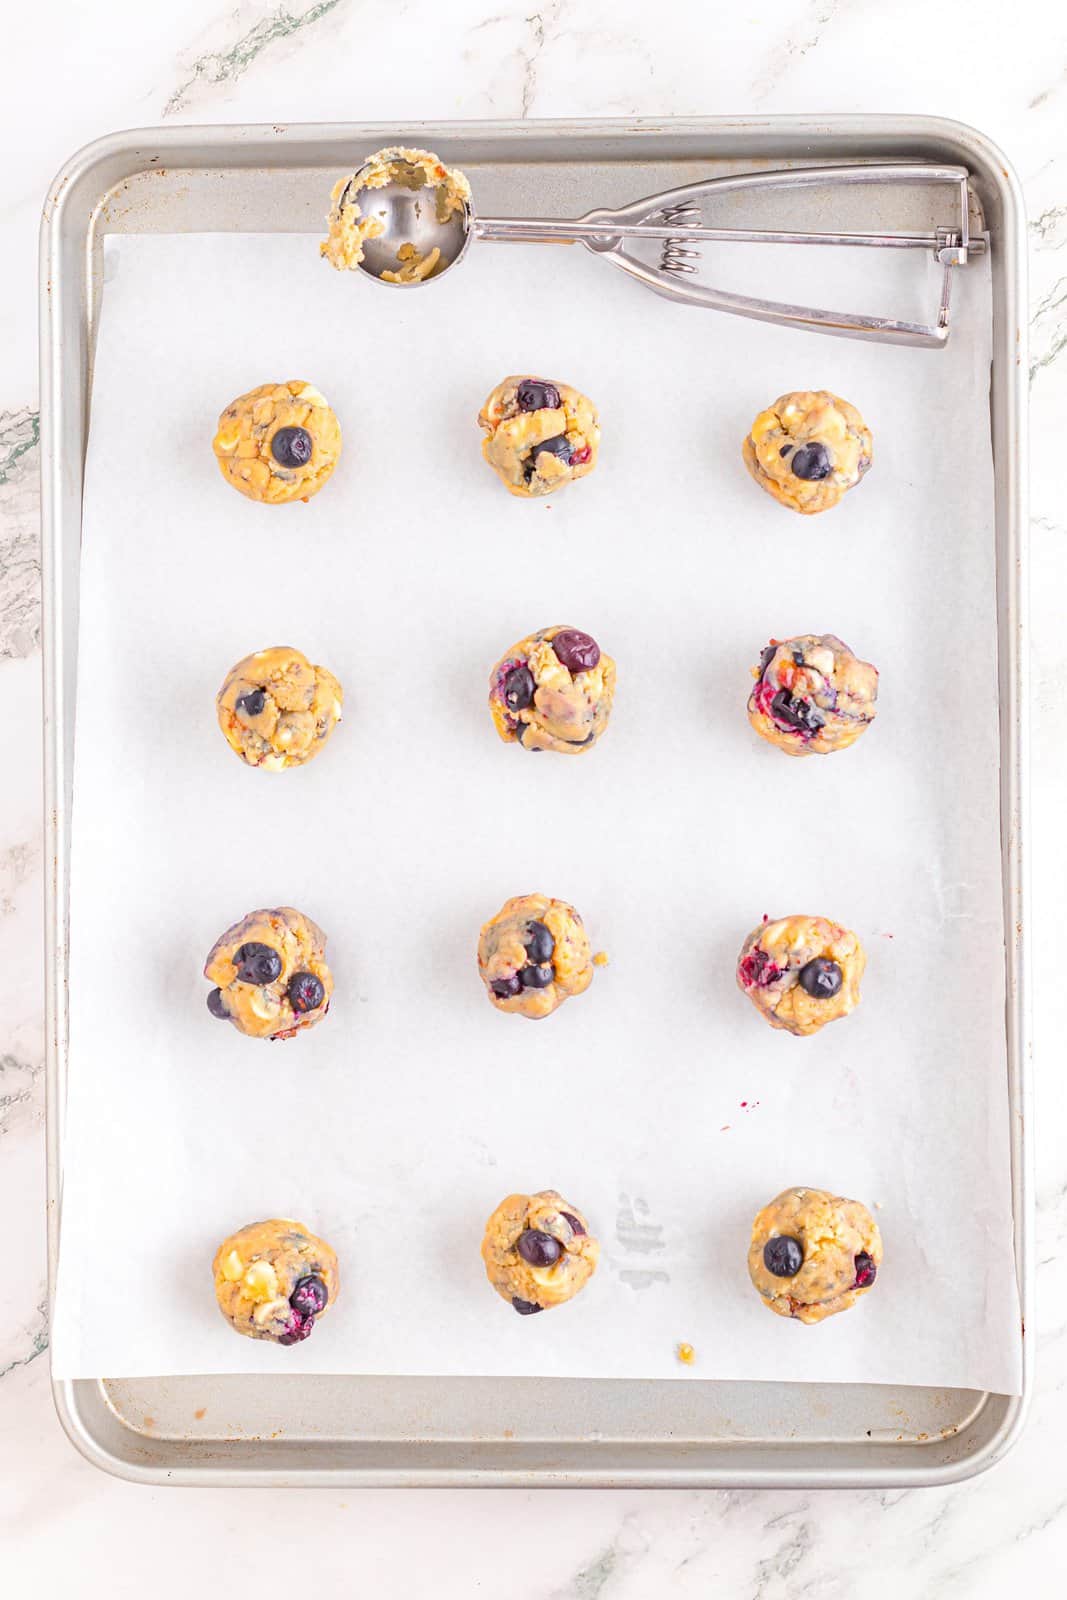 Balls of blueberry cookie dough on a parchment lined baking sheet.